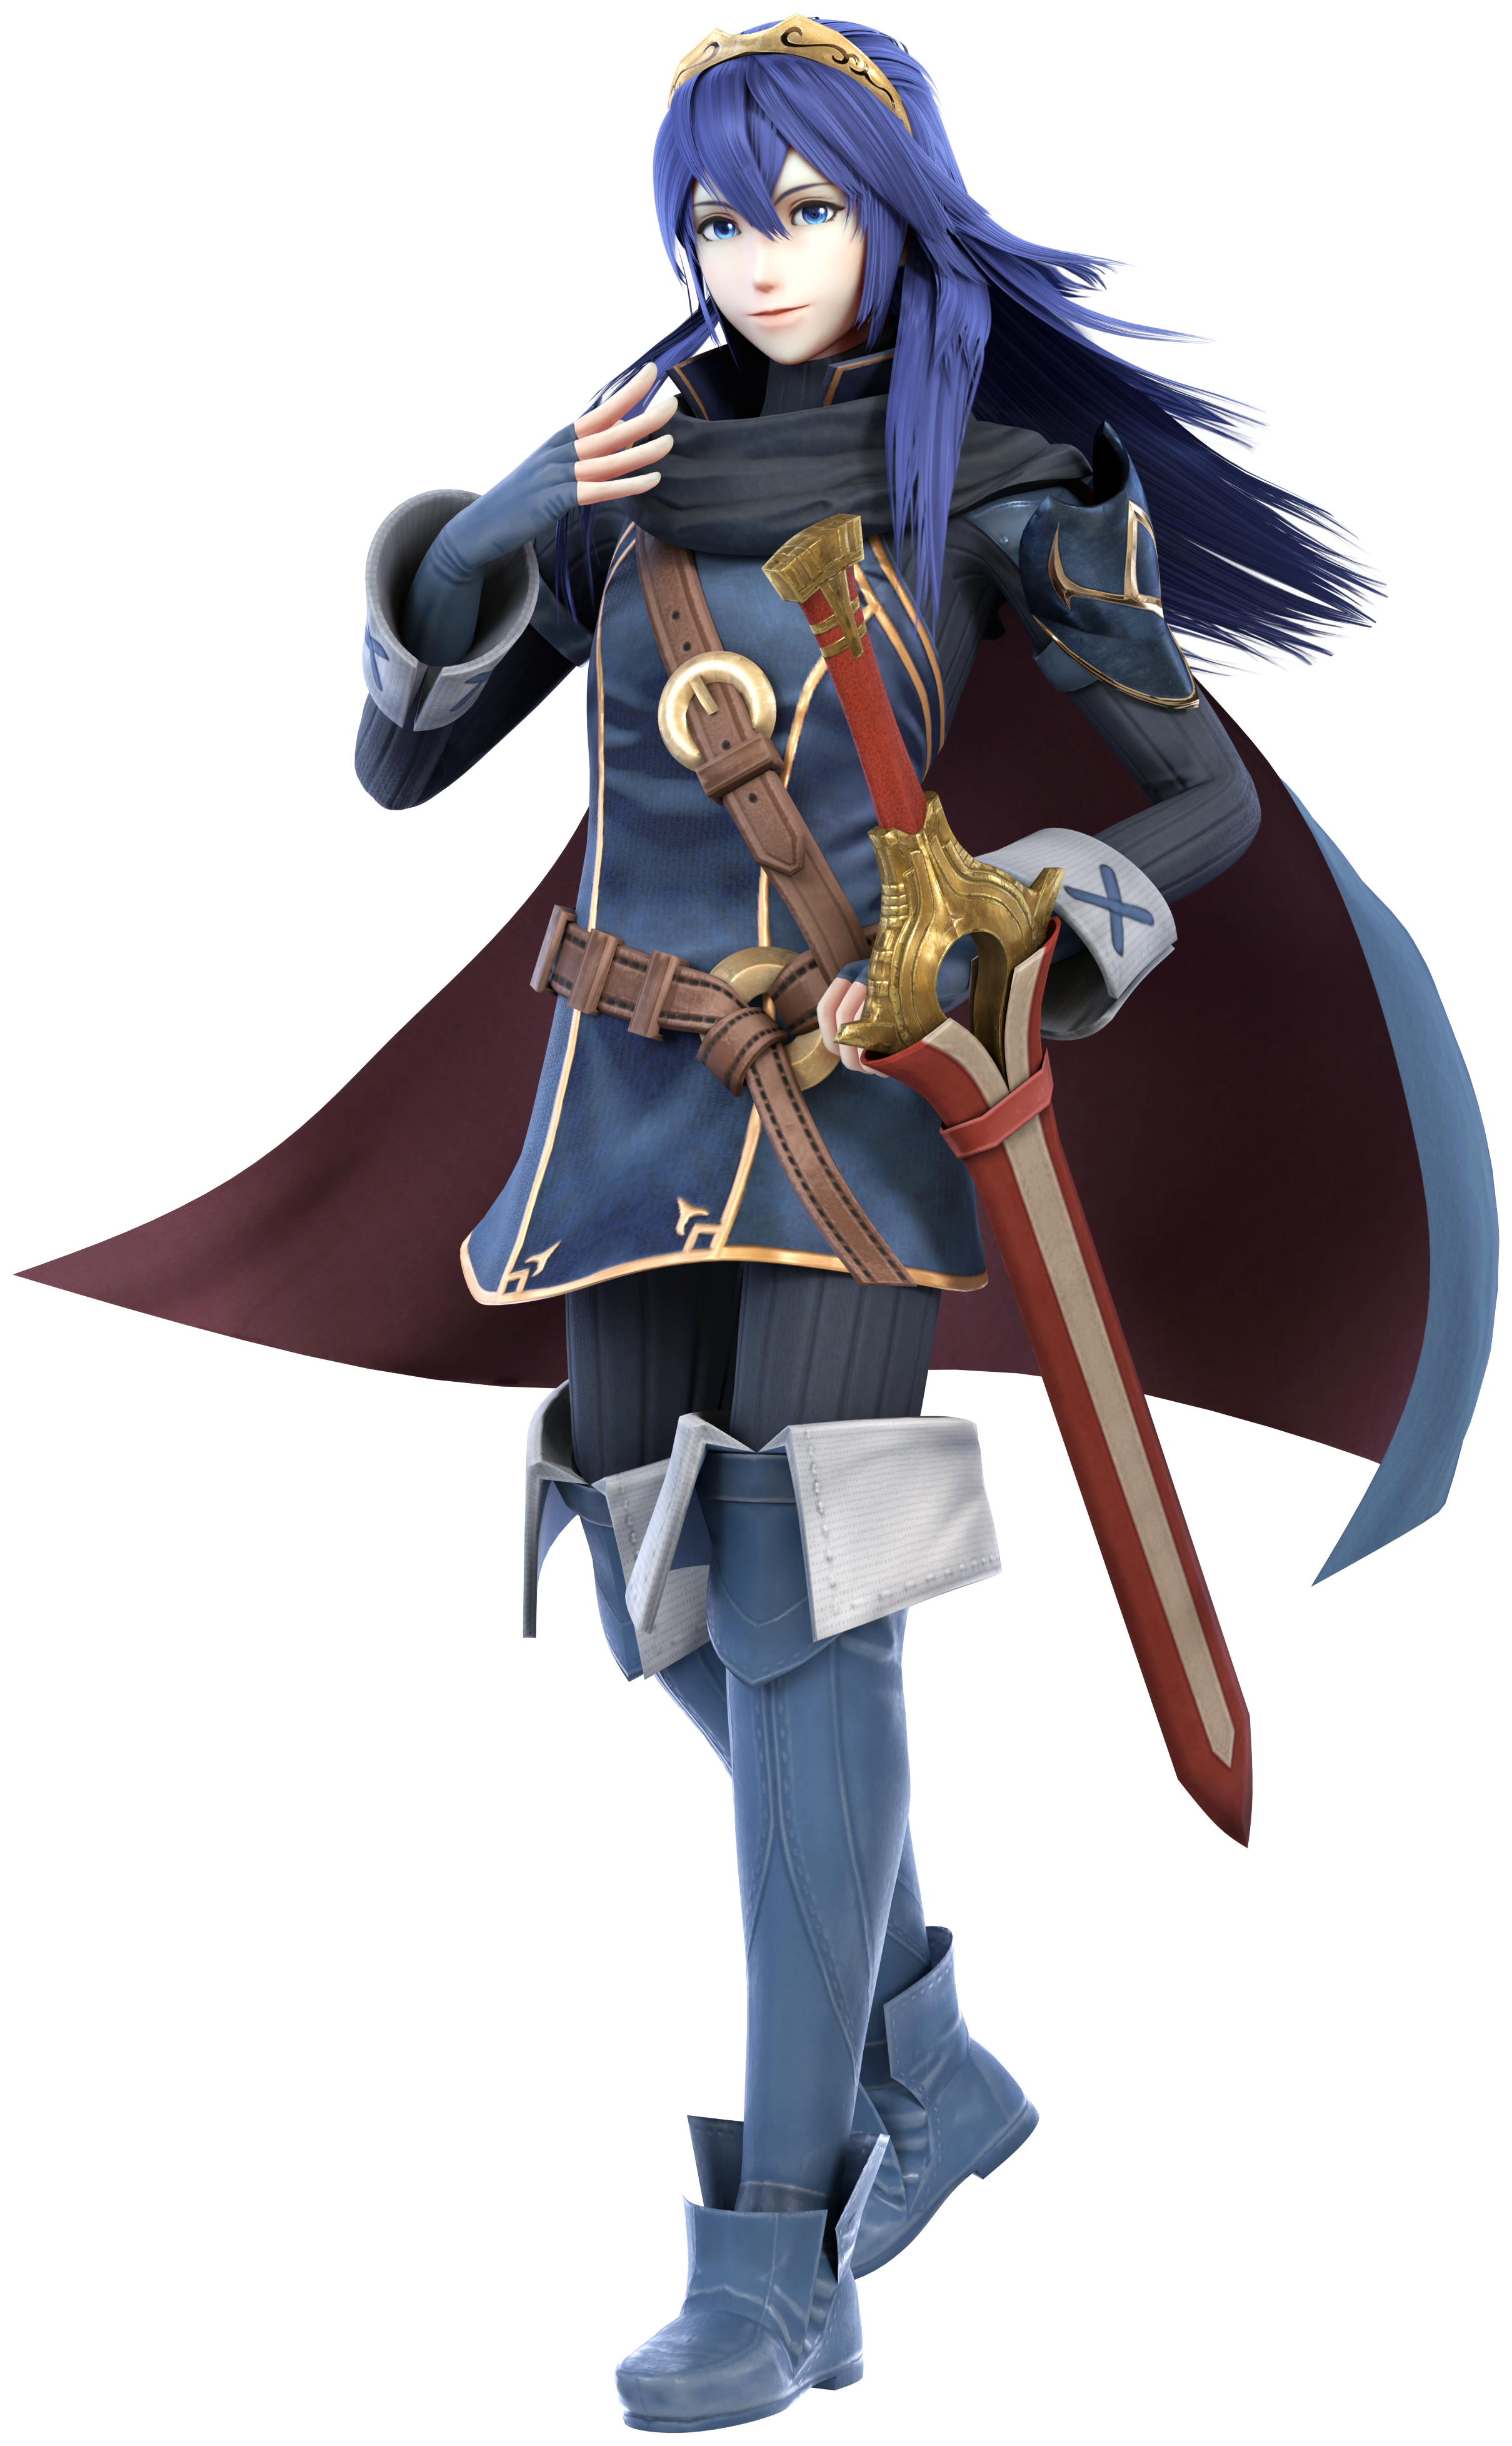 Lucina [2] by Adverse56 on DeviantArt